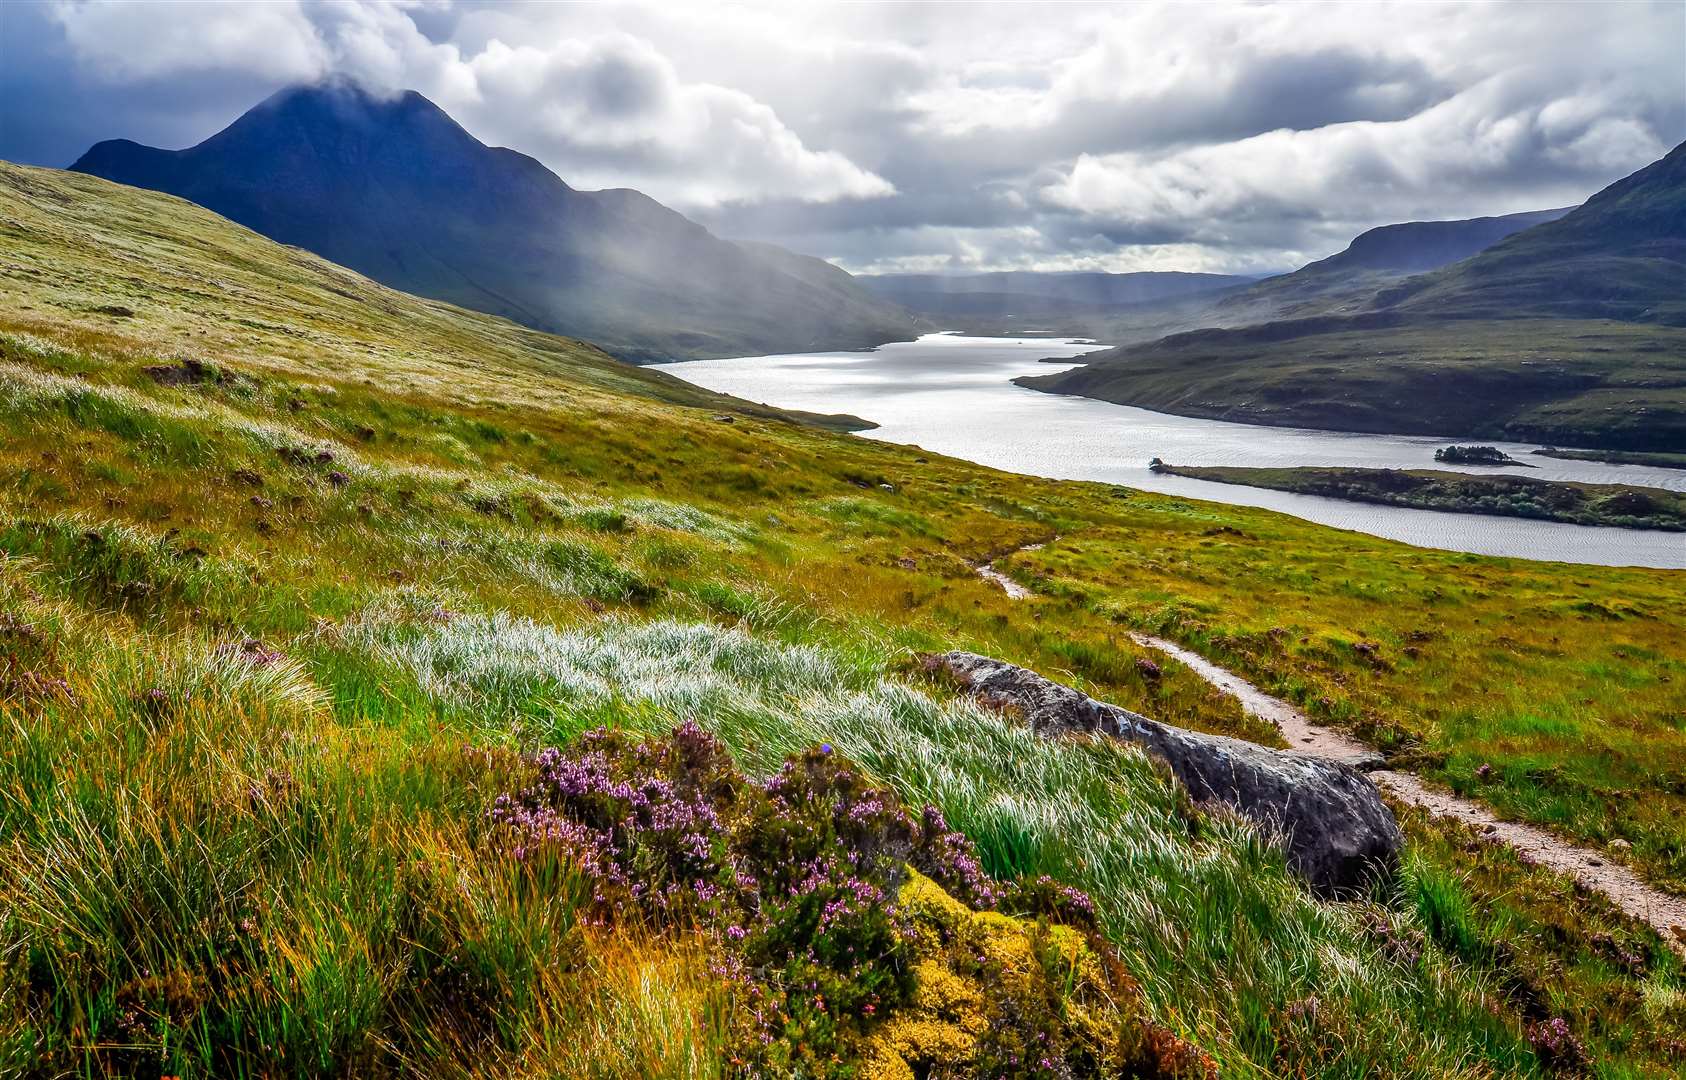 The spectacular land and seascapes of the Highlands and Islands are world renowned.